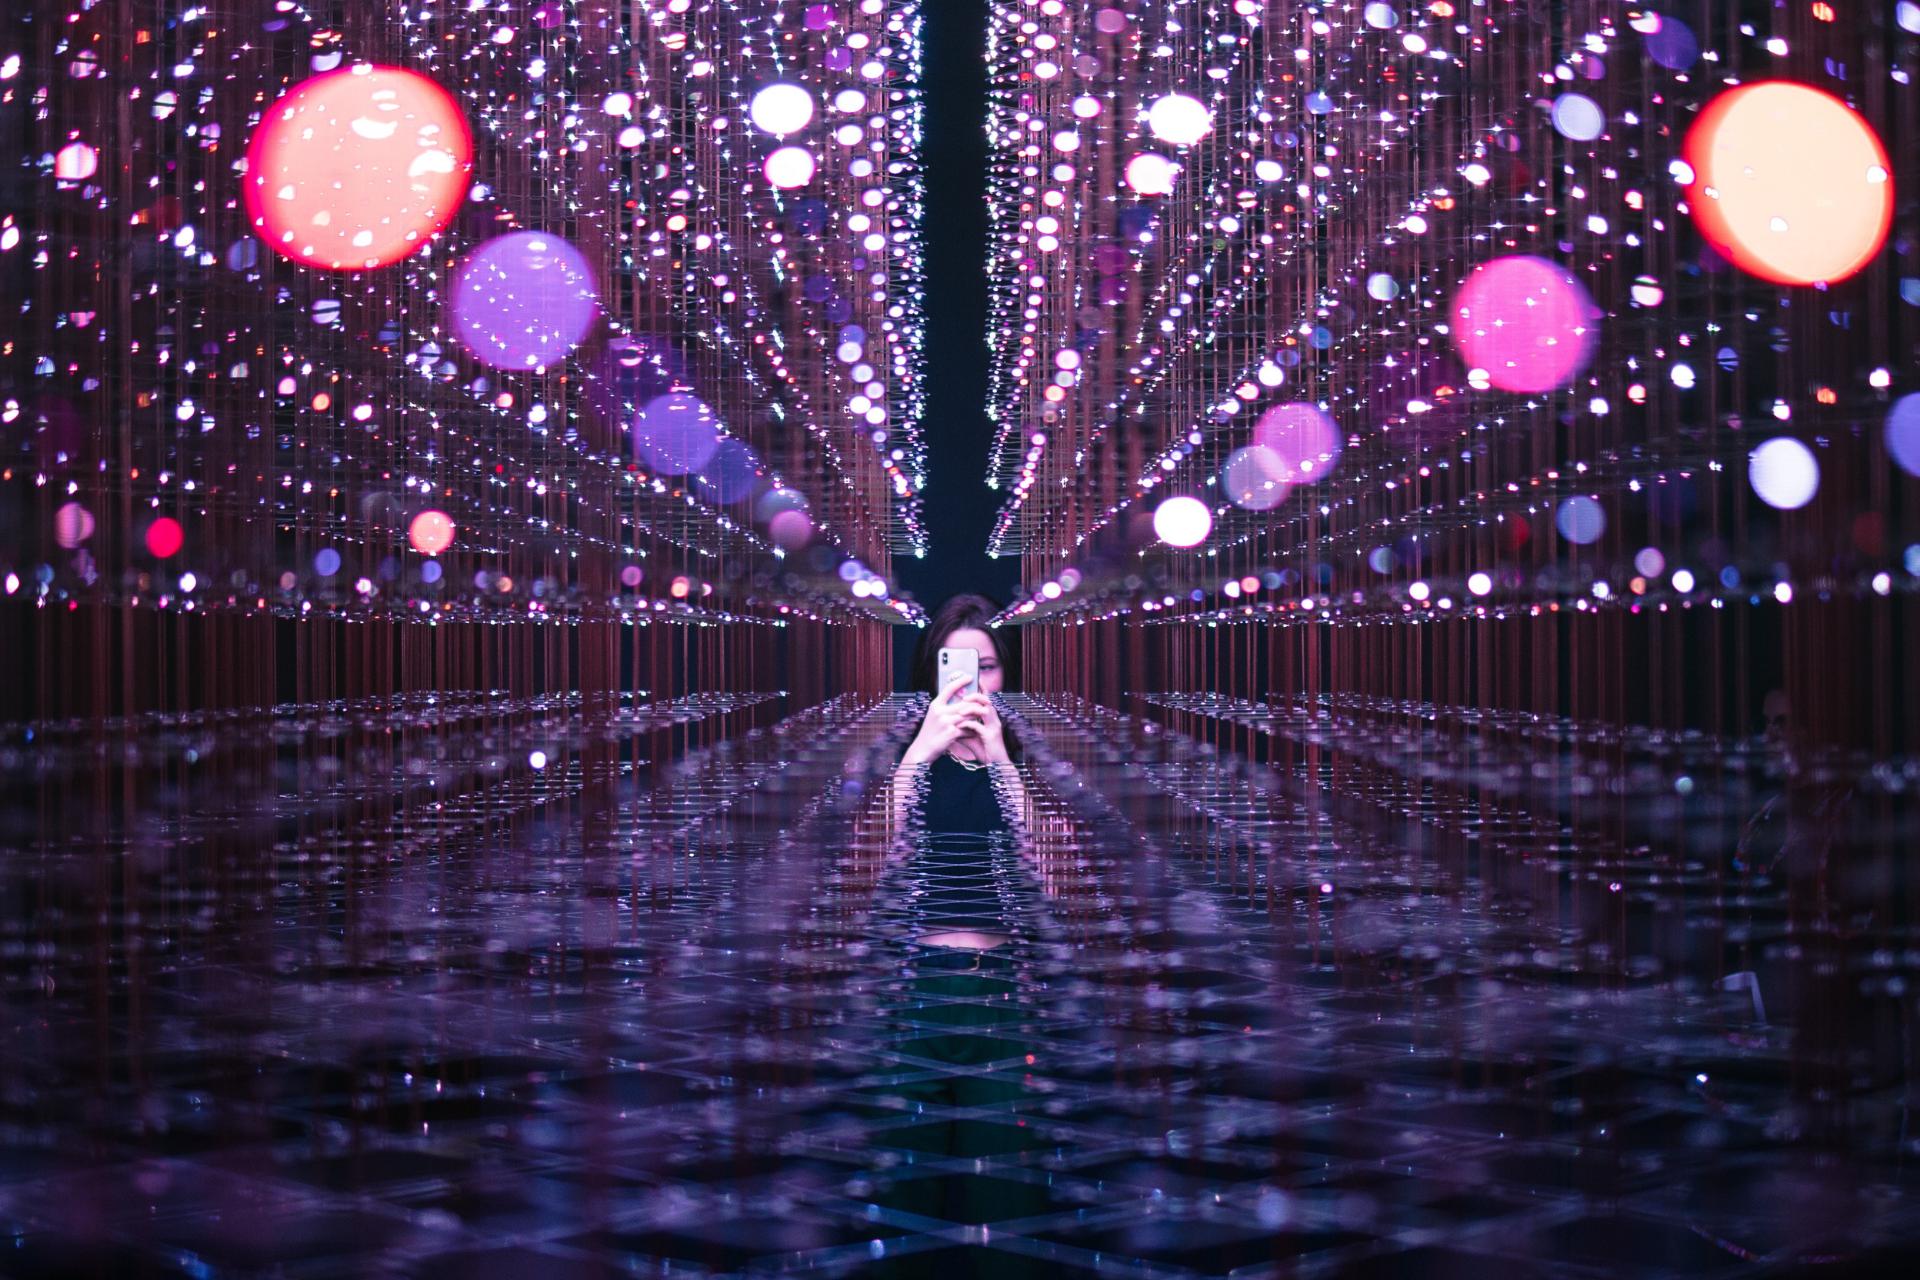 Interesting image of digital environment and girl with phone in the background